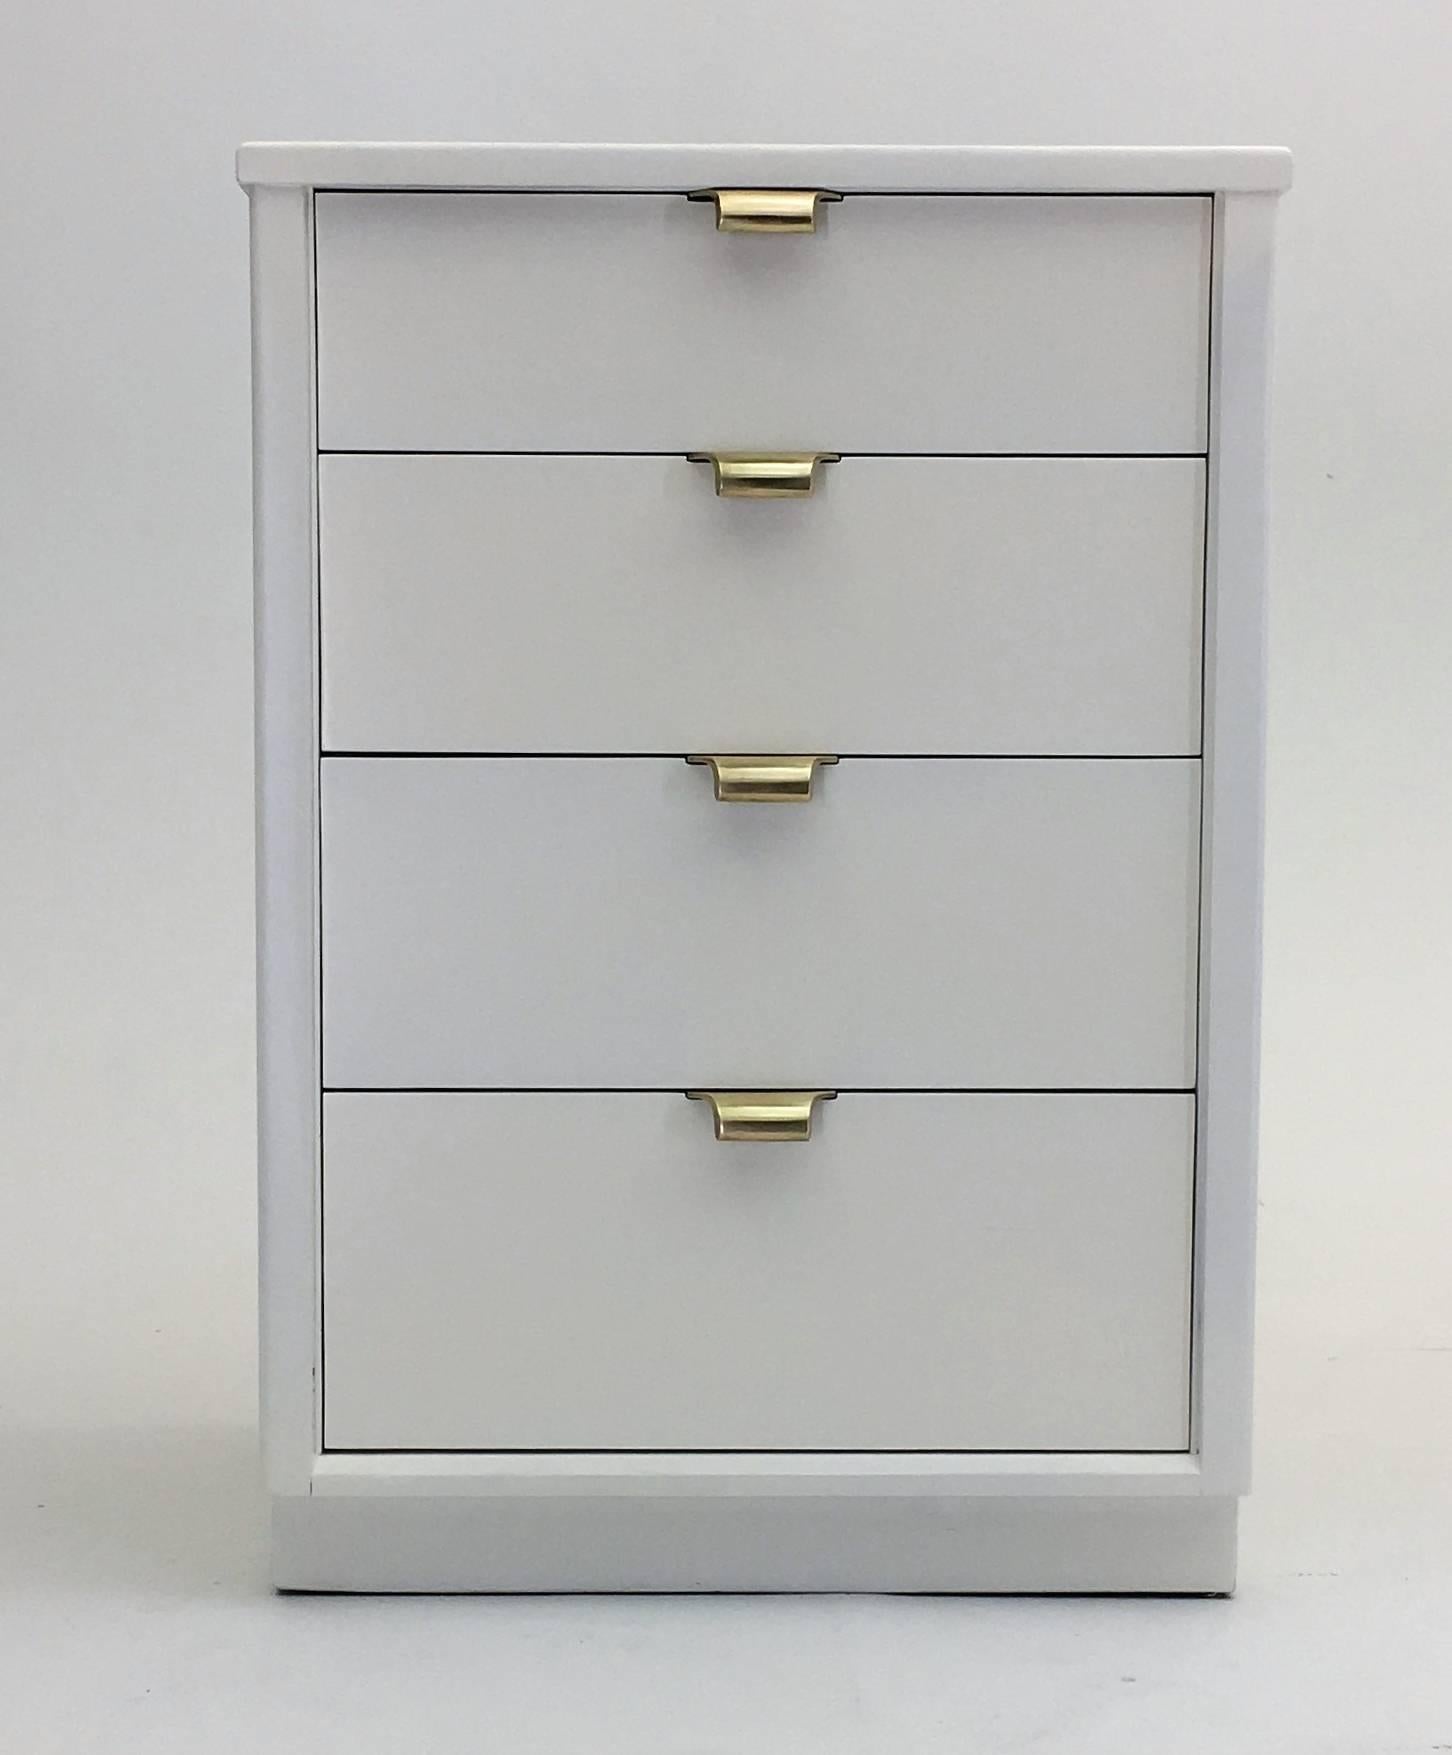 A beautiful pair of nightstands designed by Edward Wormley and executed by Drexel. This is one of the few designs performed outside of Dunbar and the linen white lacquer imparts a hollywood regency feel with the bold cast brass handles on each of